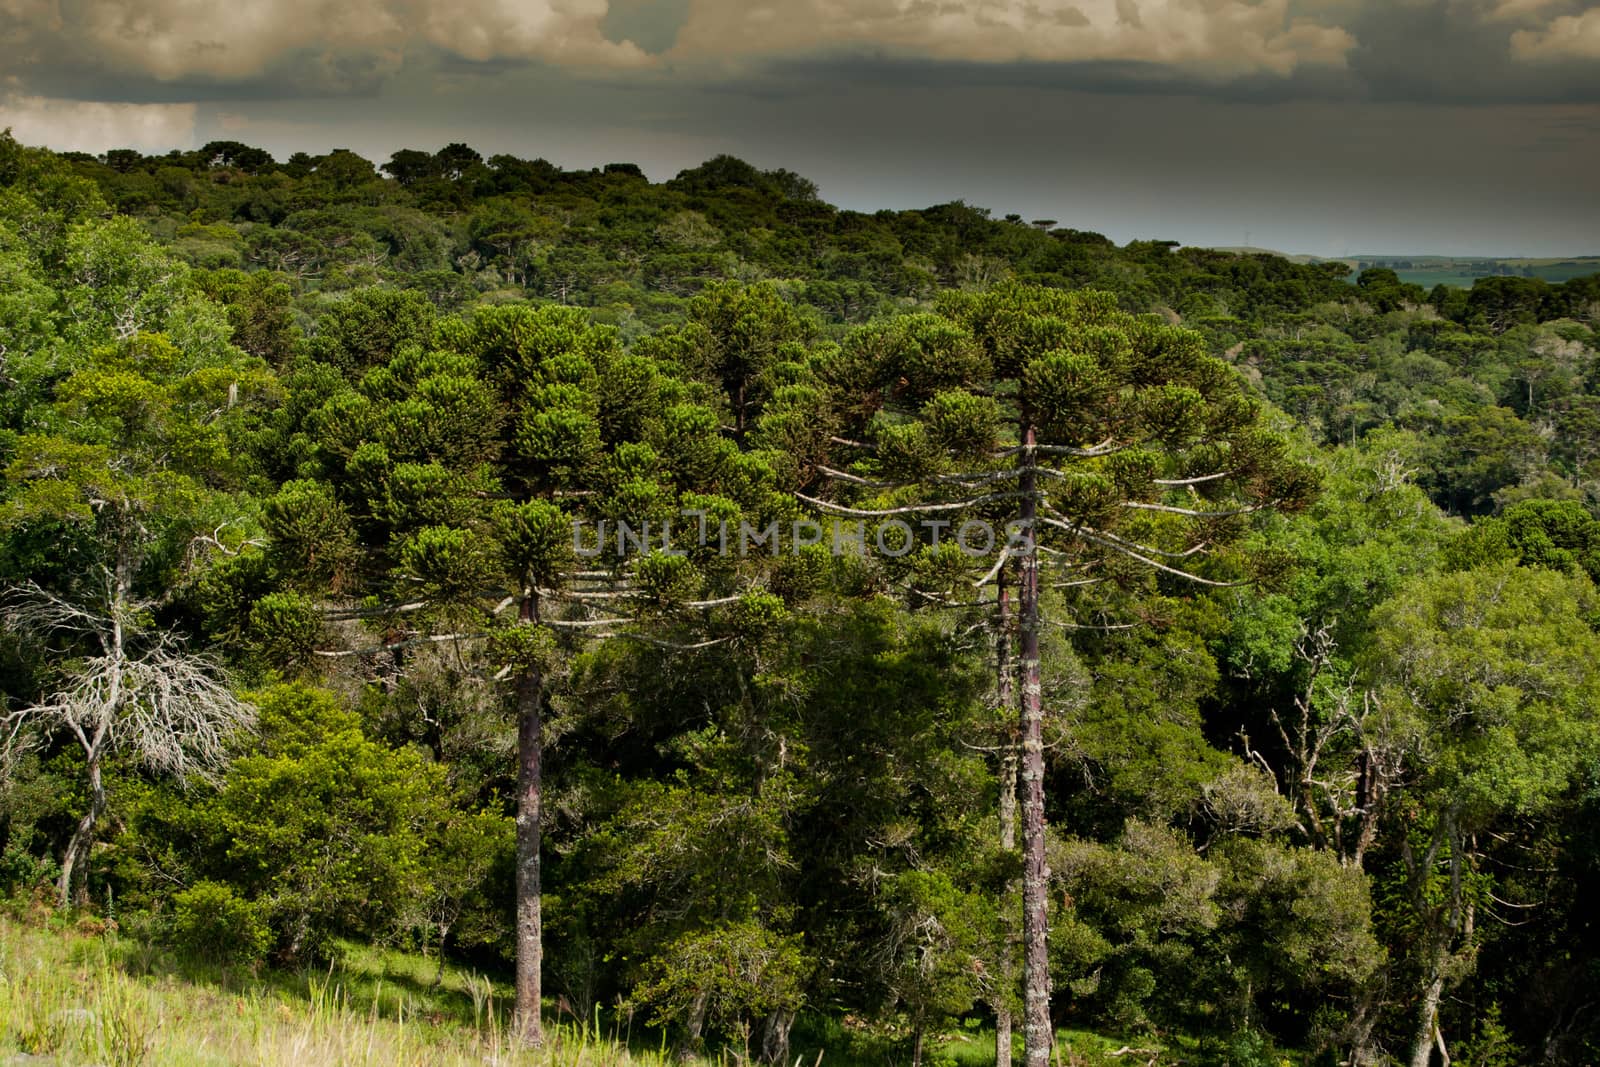 Forest with araucaria trees, endangered specie of southern Brazil.